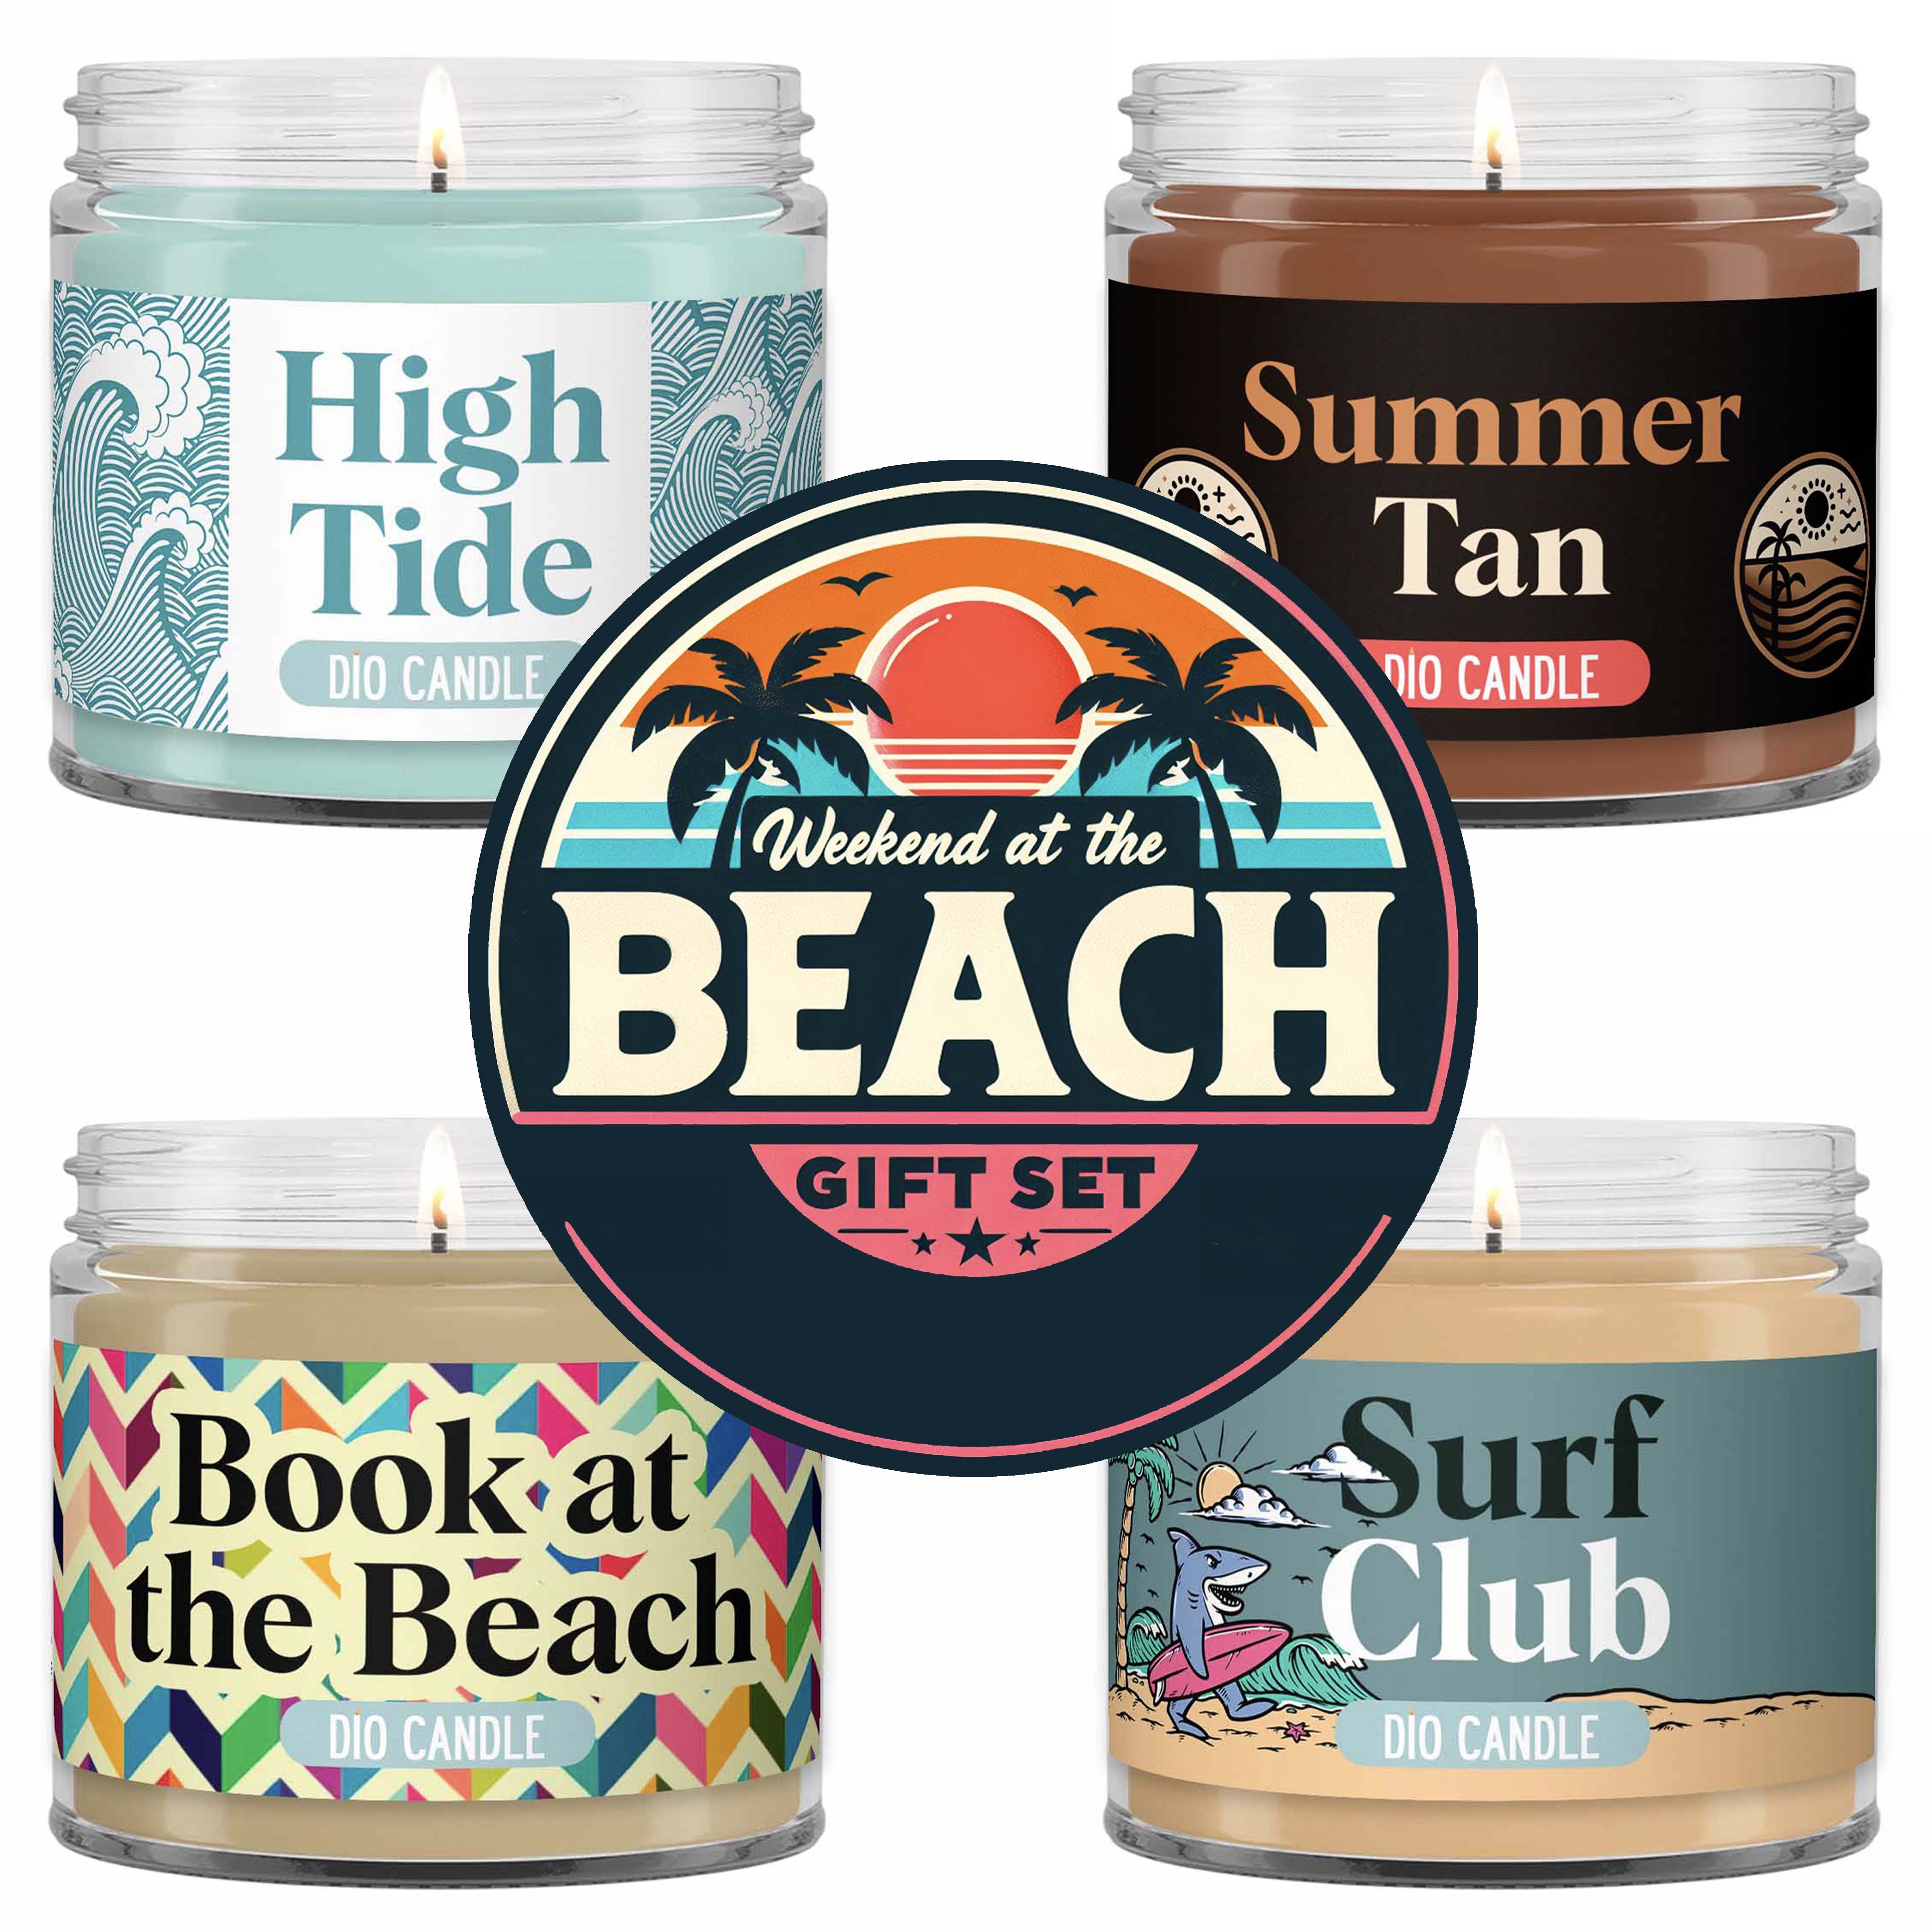 Weekend at the Beach 4 Candles Gift Set